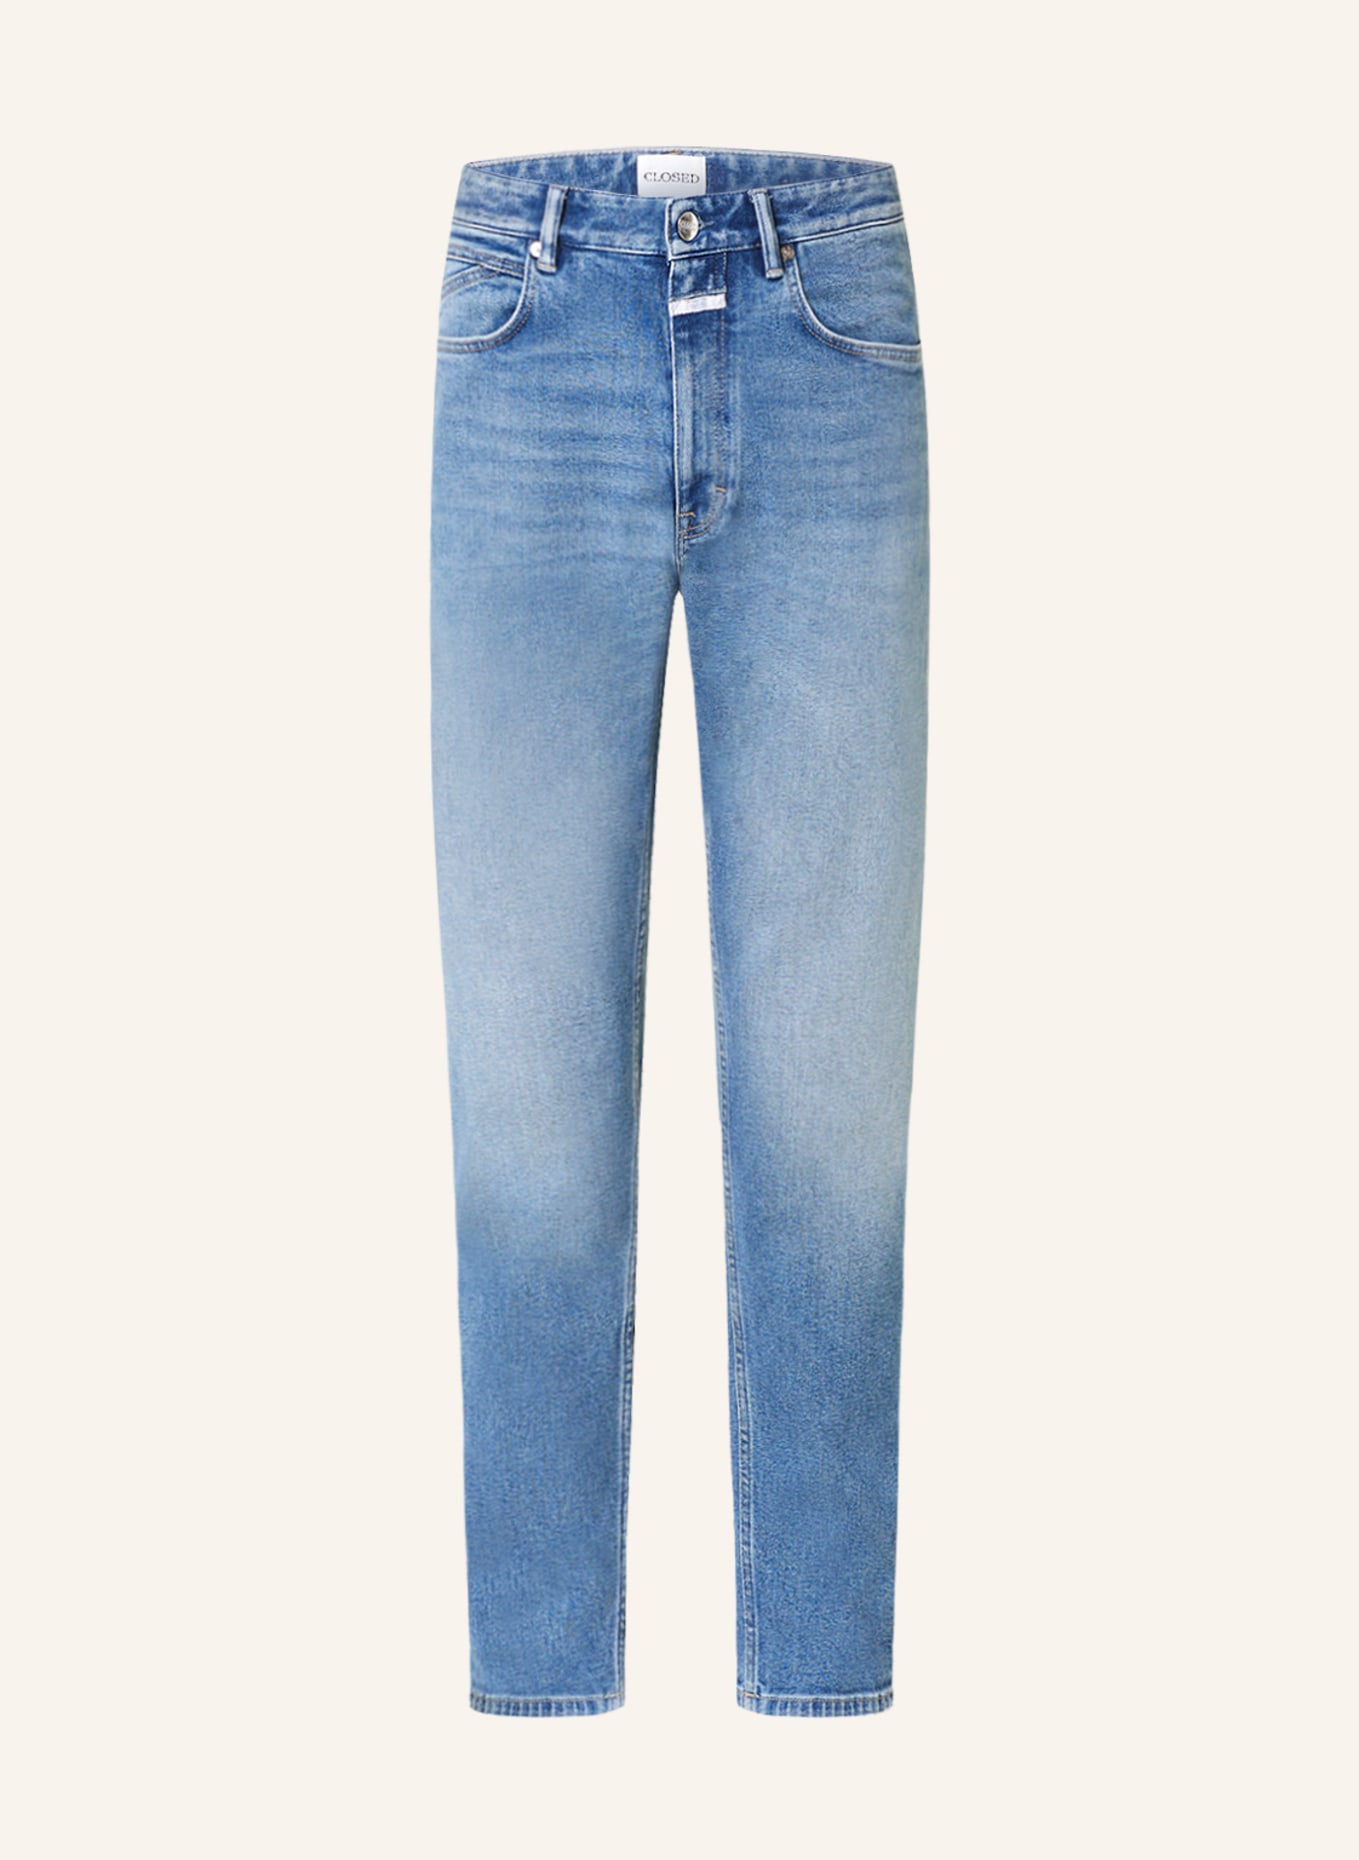 CLOSED Jeans COOPER Tapered Fit, Farbe: MBL MID BLUE (Bild 1)